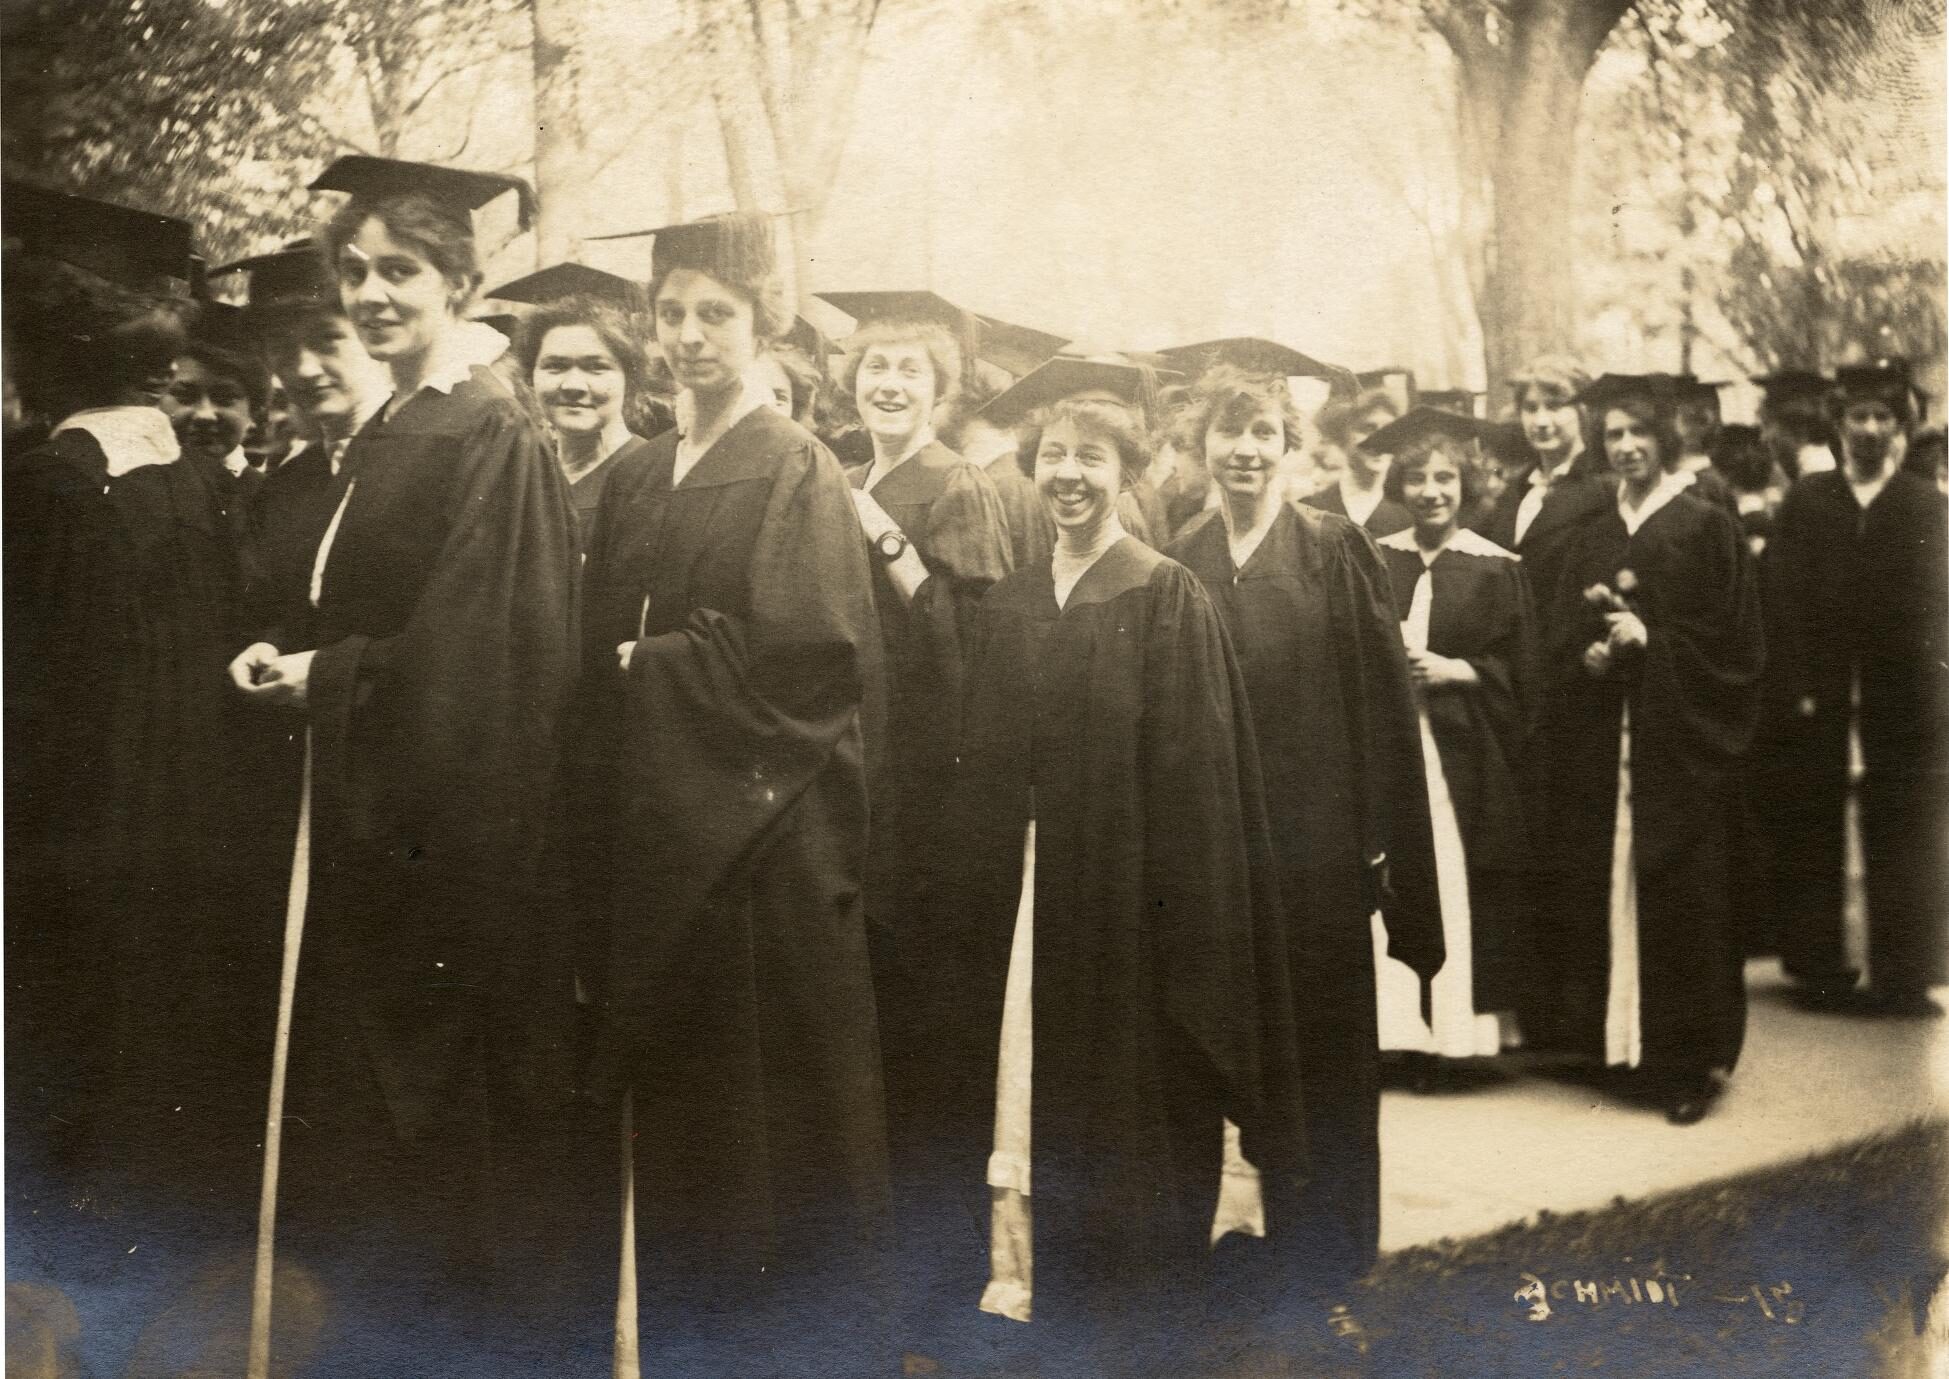 Women graduates outside in caps and gowns circa 1915.